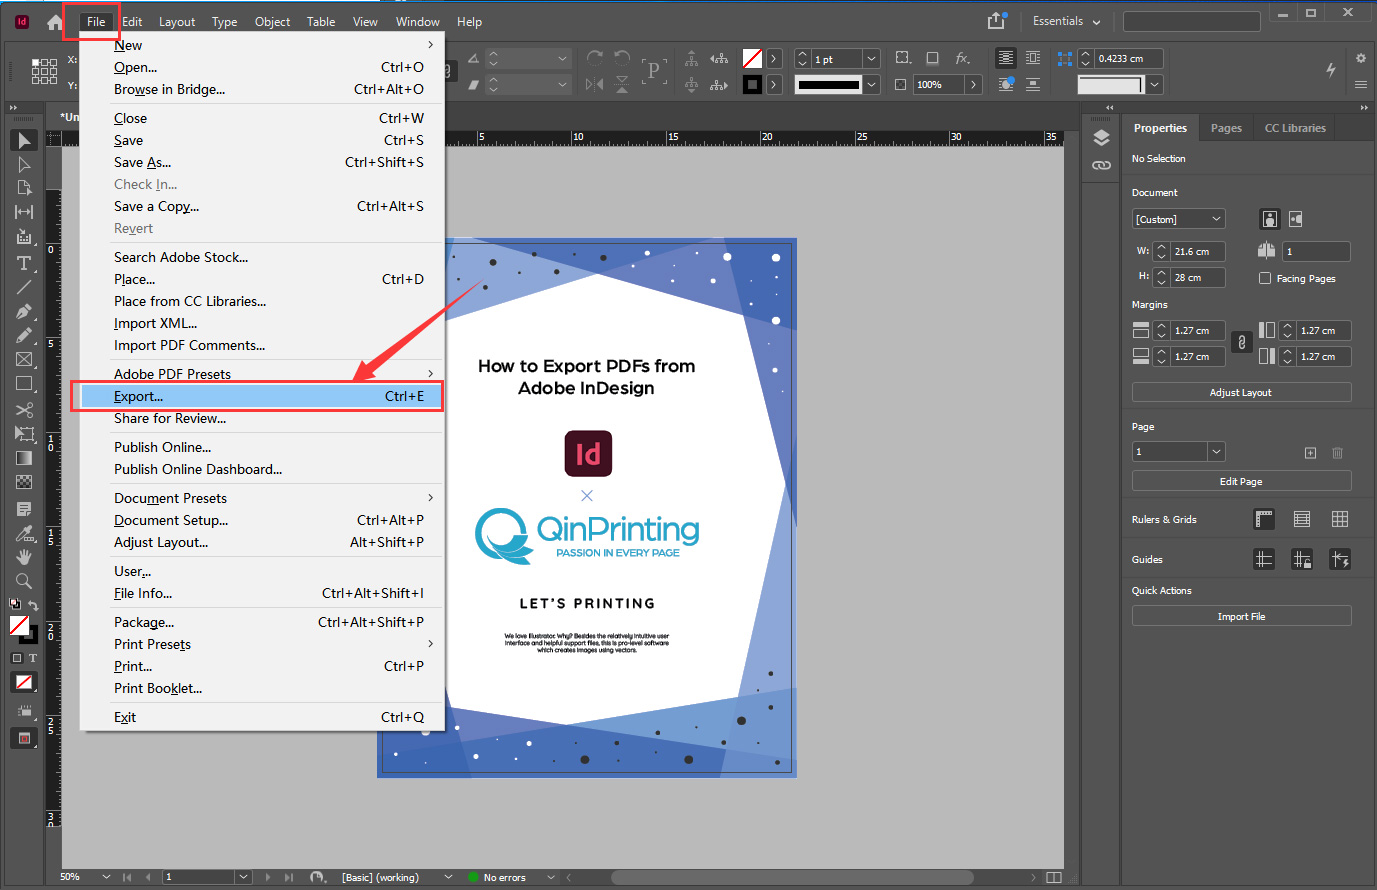 How to Export PDFs from Adobe InDesign Step 1